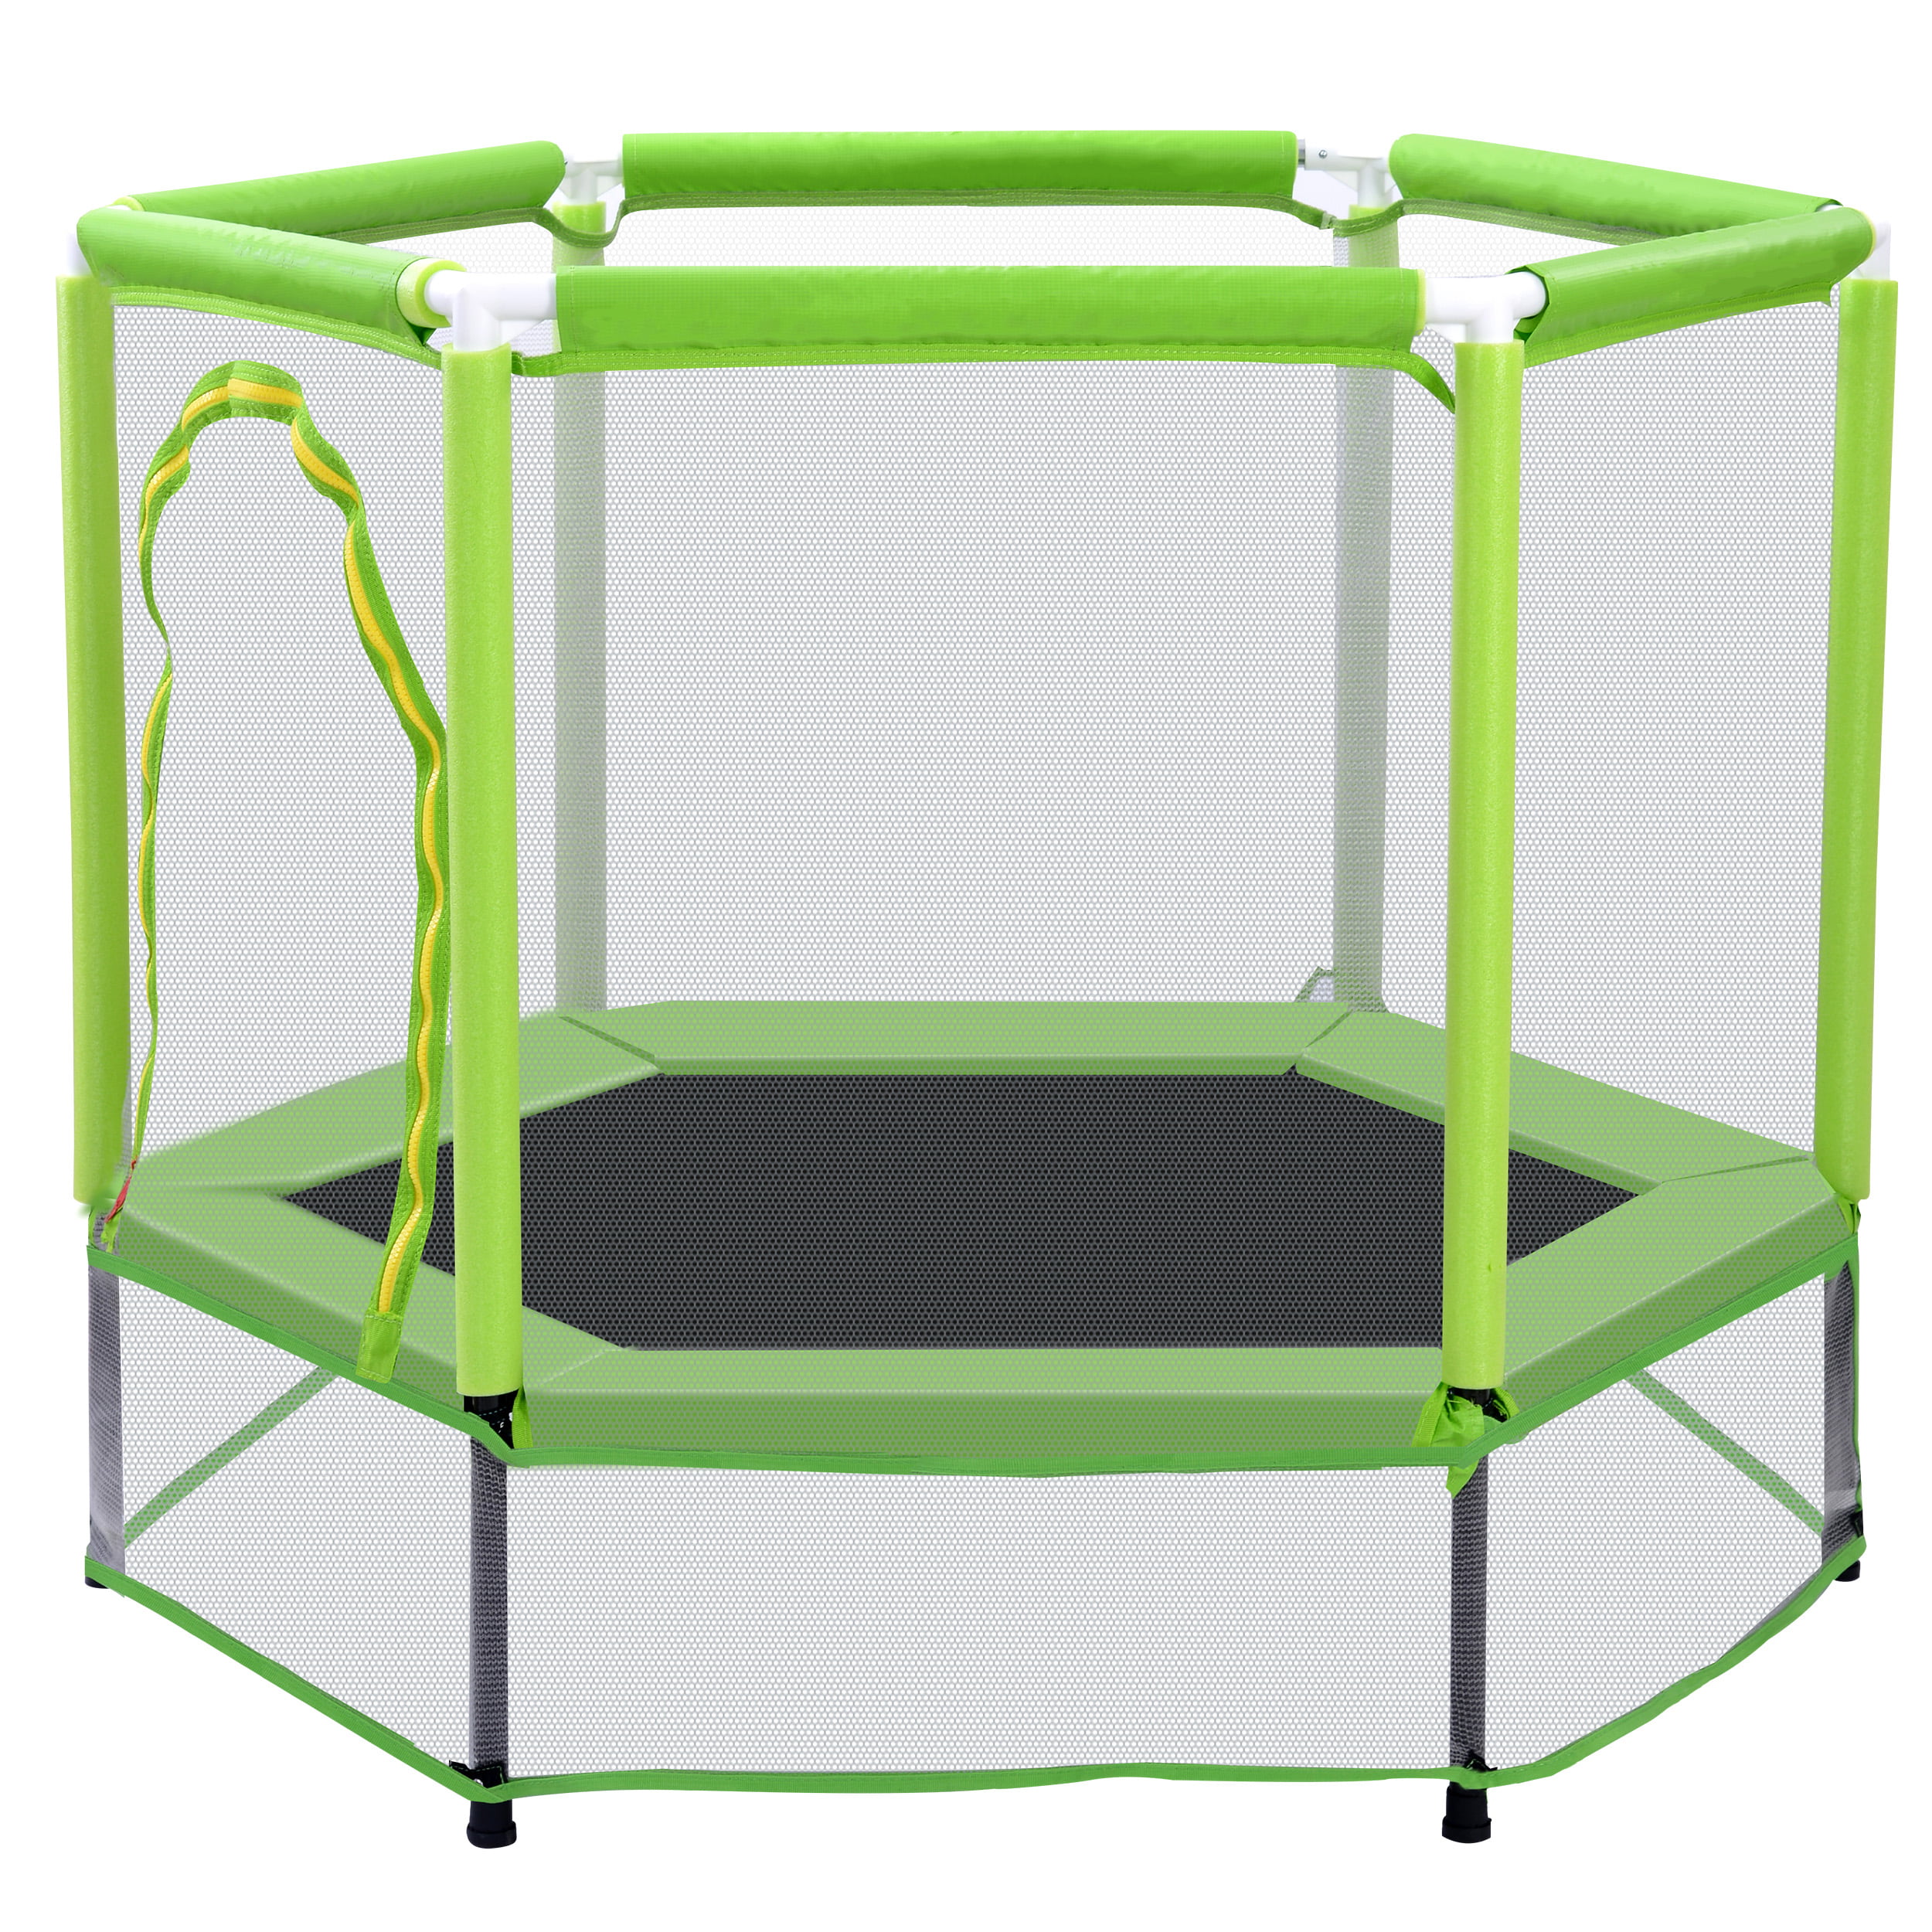 Andoer 55” Toddlers Trampoline with Safety Enclosure Net and Balls, Indoor Outdoor Mini Trampoline for Kids